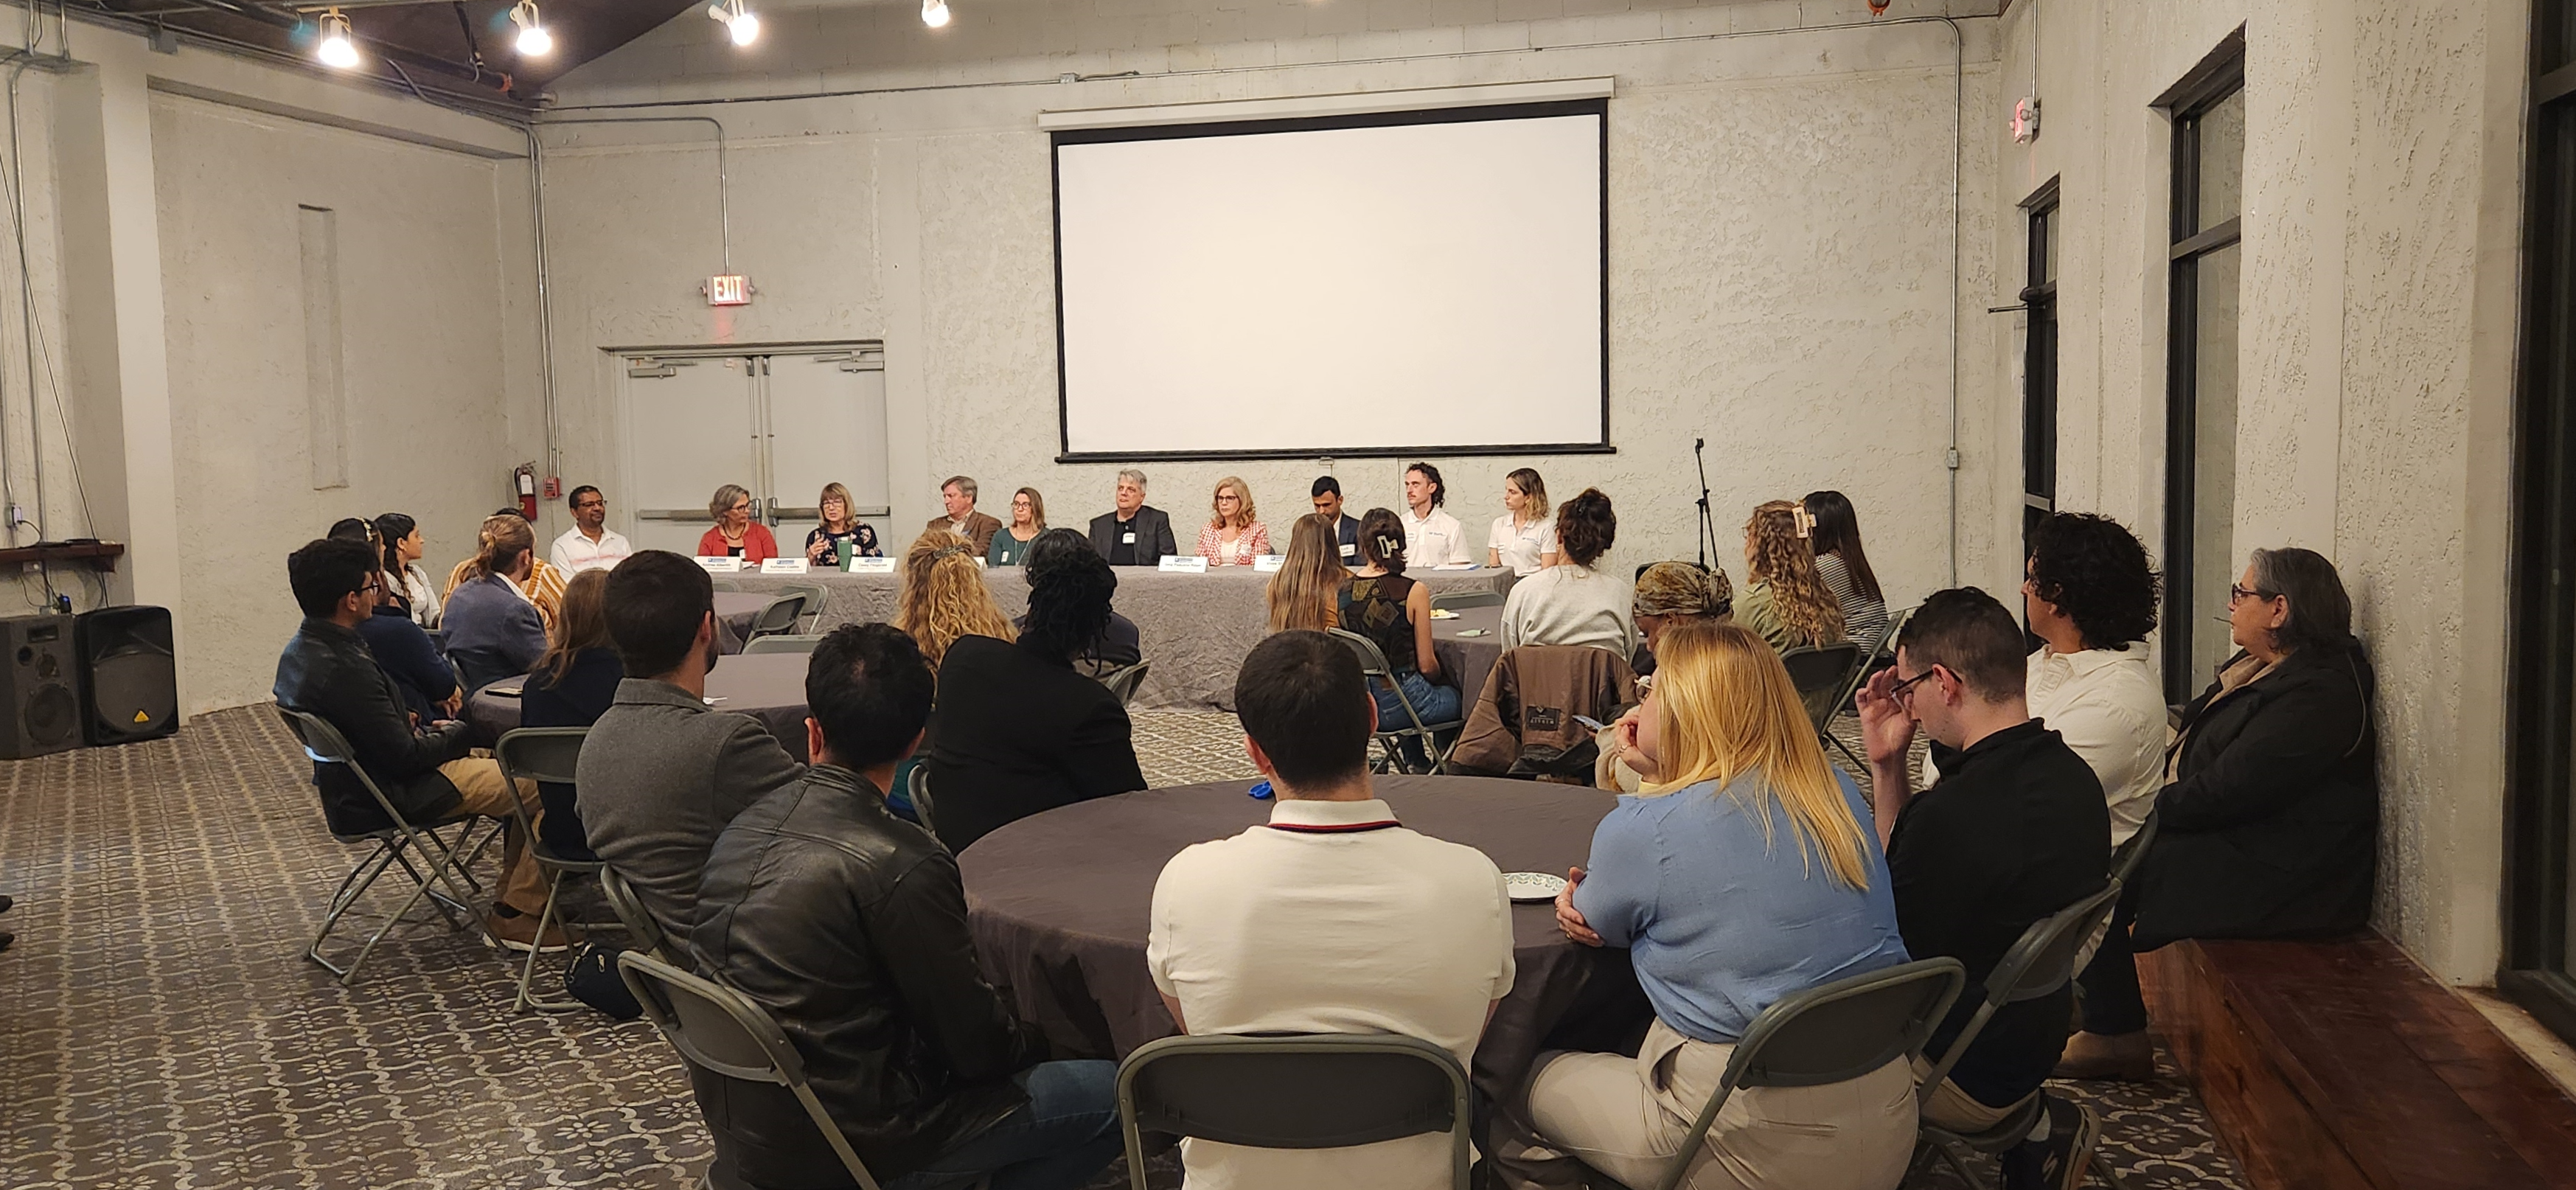 From left to right: Career Panelists Tirusew Asefa, Andrea Albertin, Kathleen Coates, Casey Fitzgerald, Stacie Greco, Jeffrey King, Gina Paduano Ralph, Vivek Shama, and moderators Paul Donsky and Gabrielle Quadrado. They are at a table in front of an audience of graduate students.